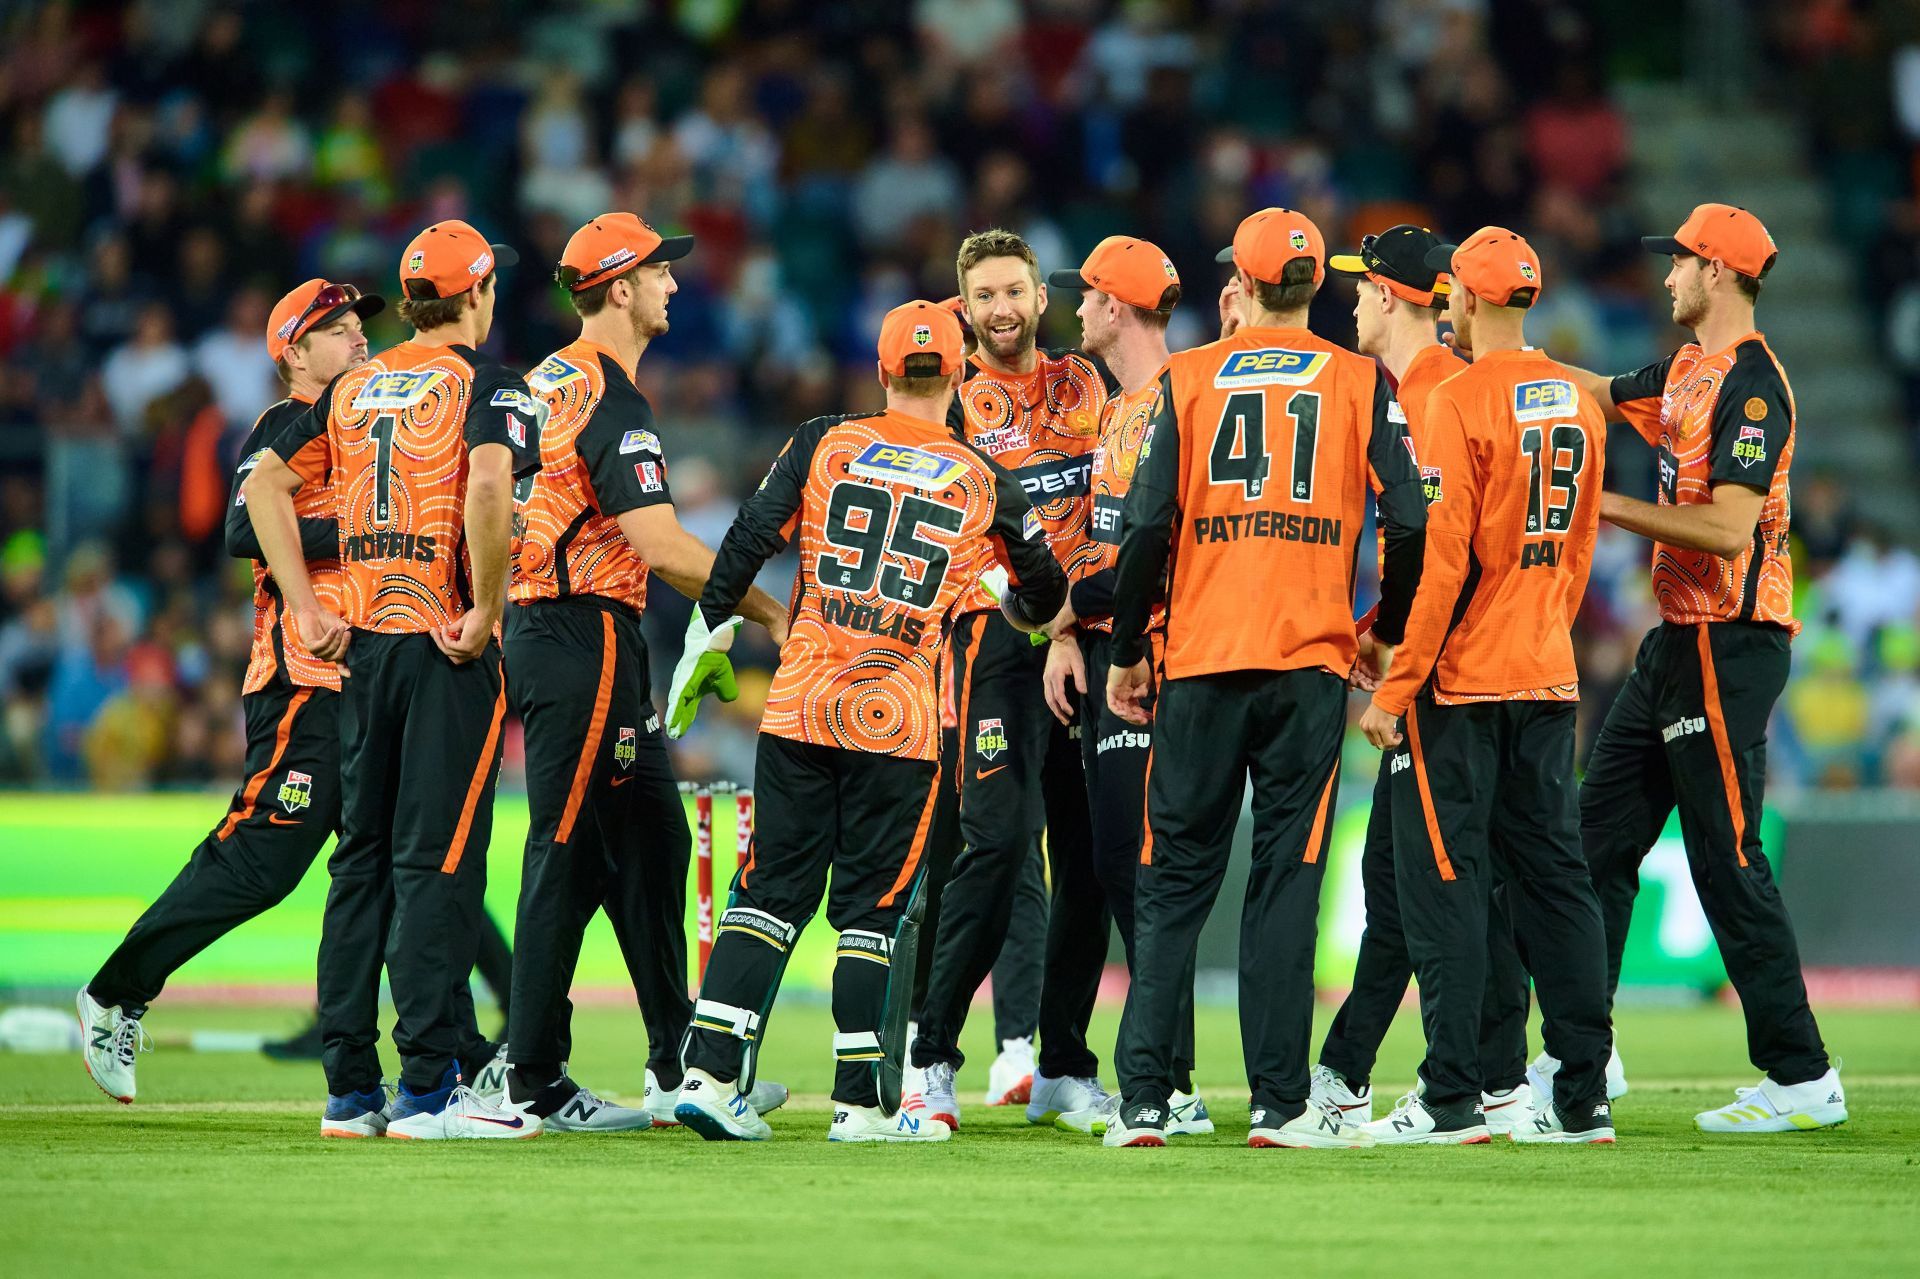 The Scorchers will be looking to get a win under their belt.